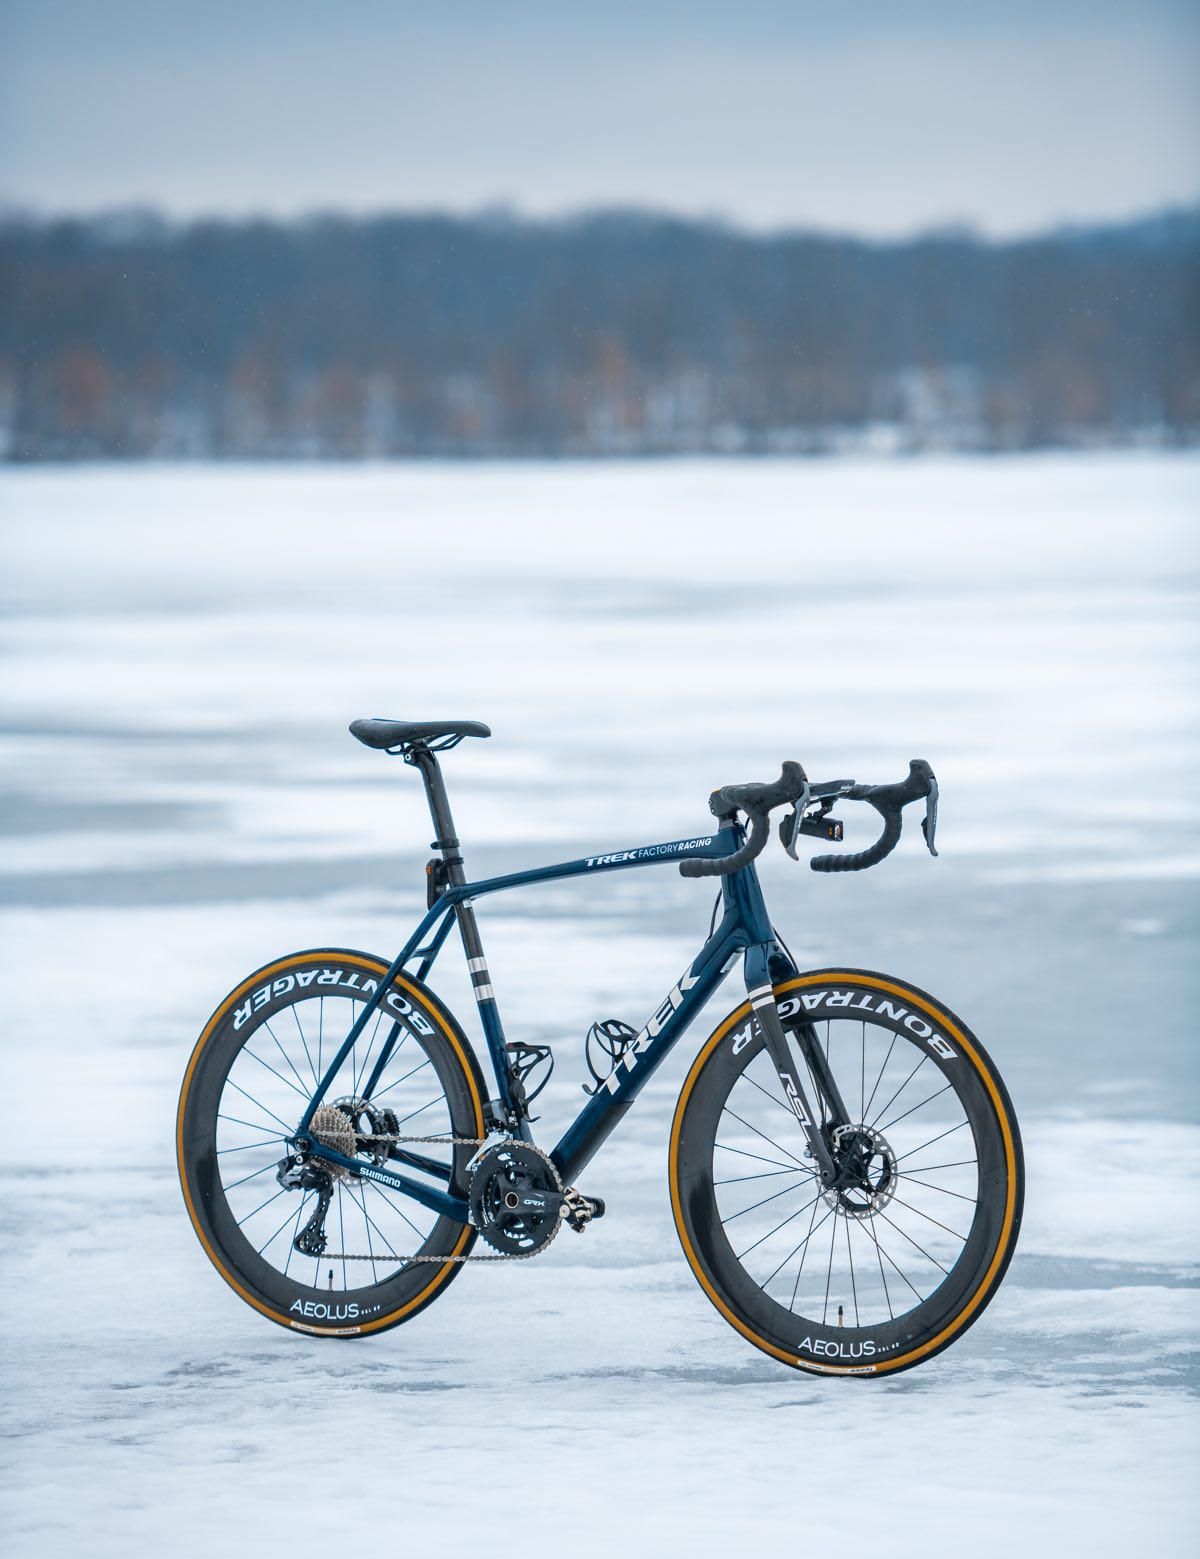 bikerumor pic of the day a gravel bike is posed on a frozen lake, the sky is covered in clouds and the day has a grey wash, there are trees in the distance at the end of the frozen lake.